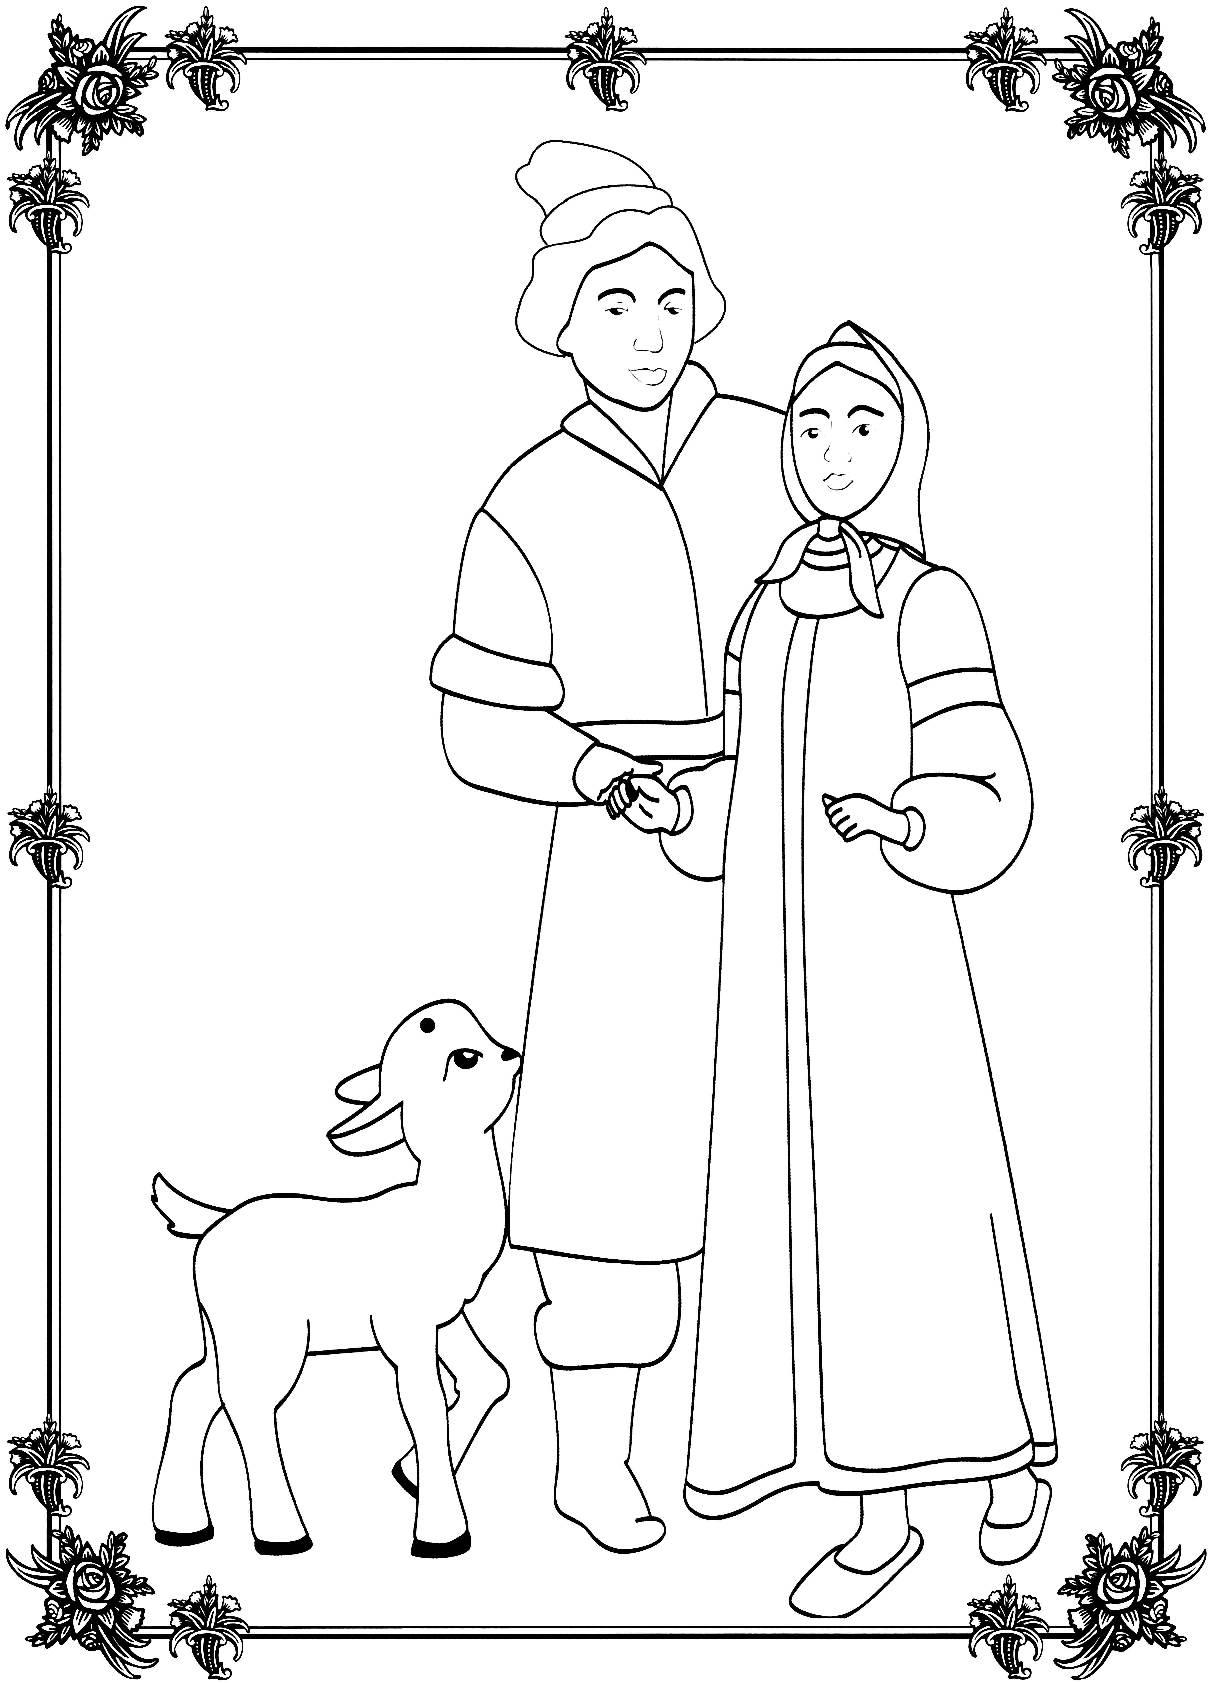 Coloring coloring pages the fairy tale Alyonushka and brother Ivanushka boy, Alyonushka and brother Ivanushka, Sister Alyonushka tale coloring pages and brother Ivanushka